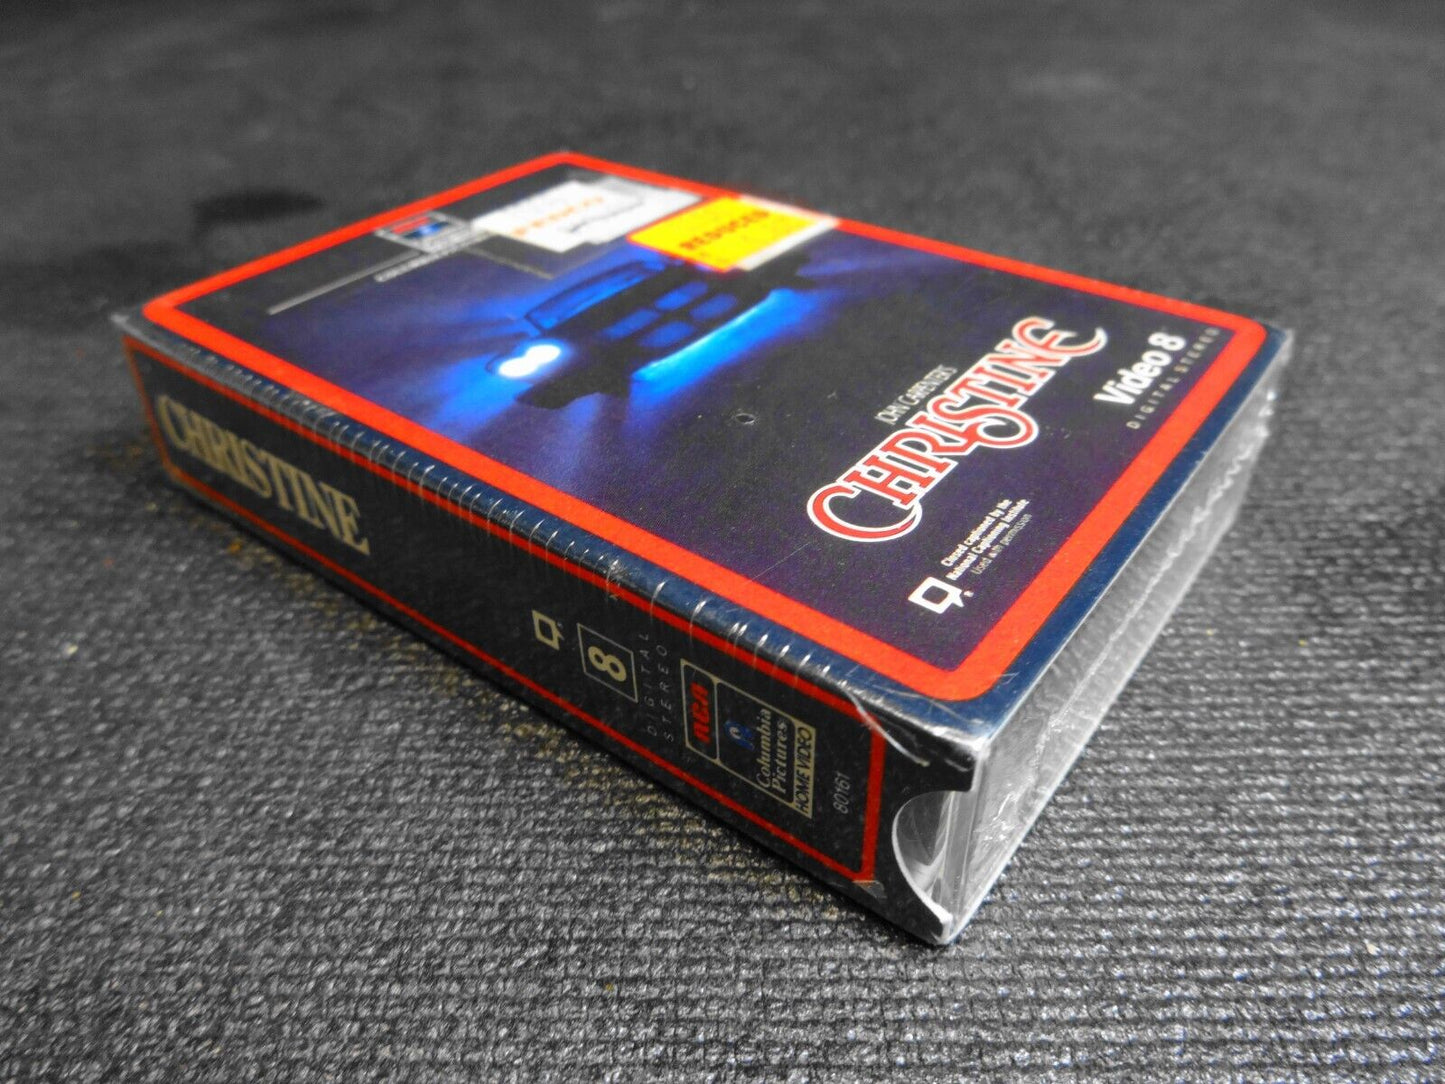 RARE - Christine (Movie 1983) on Video 8 Cassette in factory sealed package